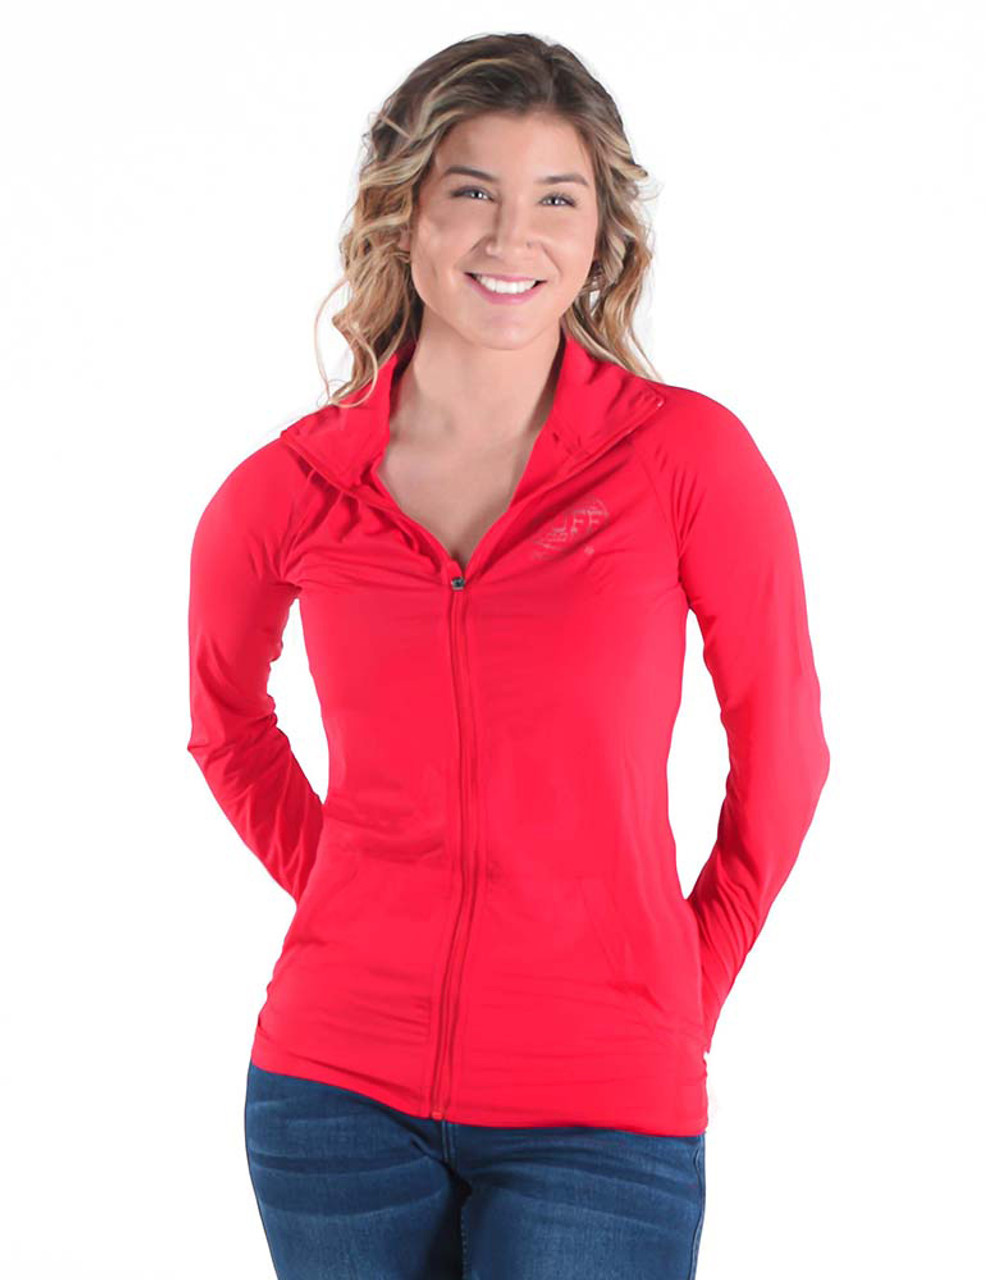 Breathe Instant Cooling Upf Full Zip Cadet Long Sleeve With Front Pouch Pocket Bright Red